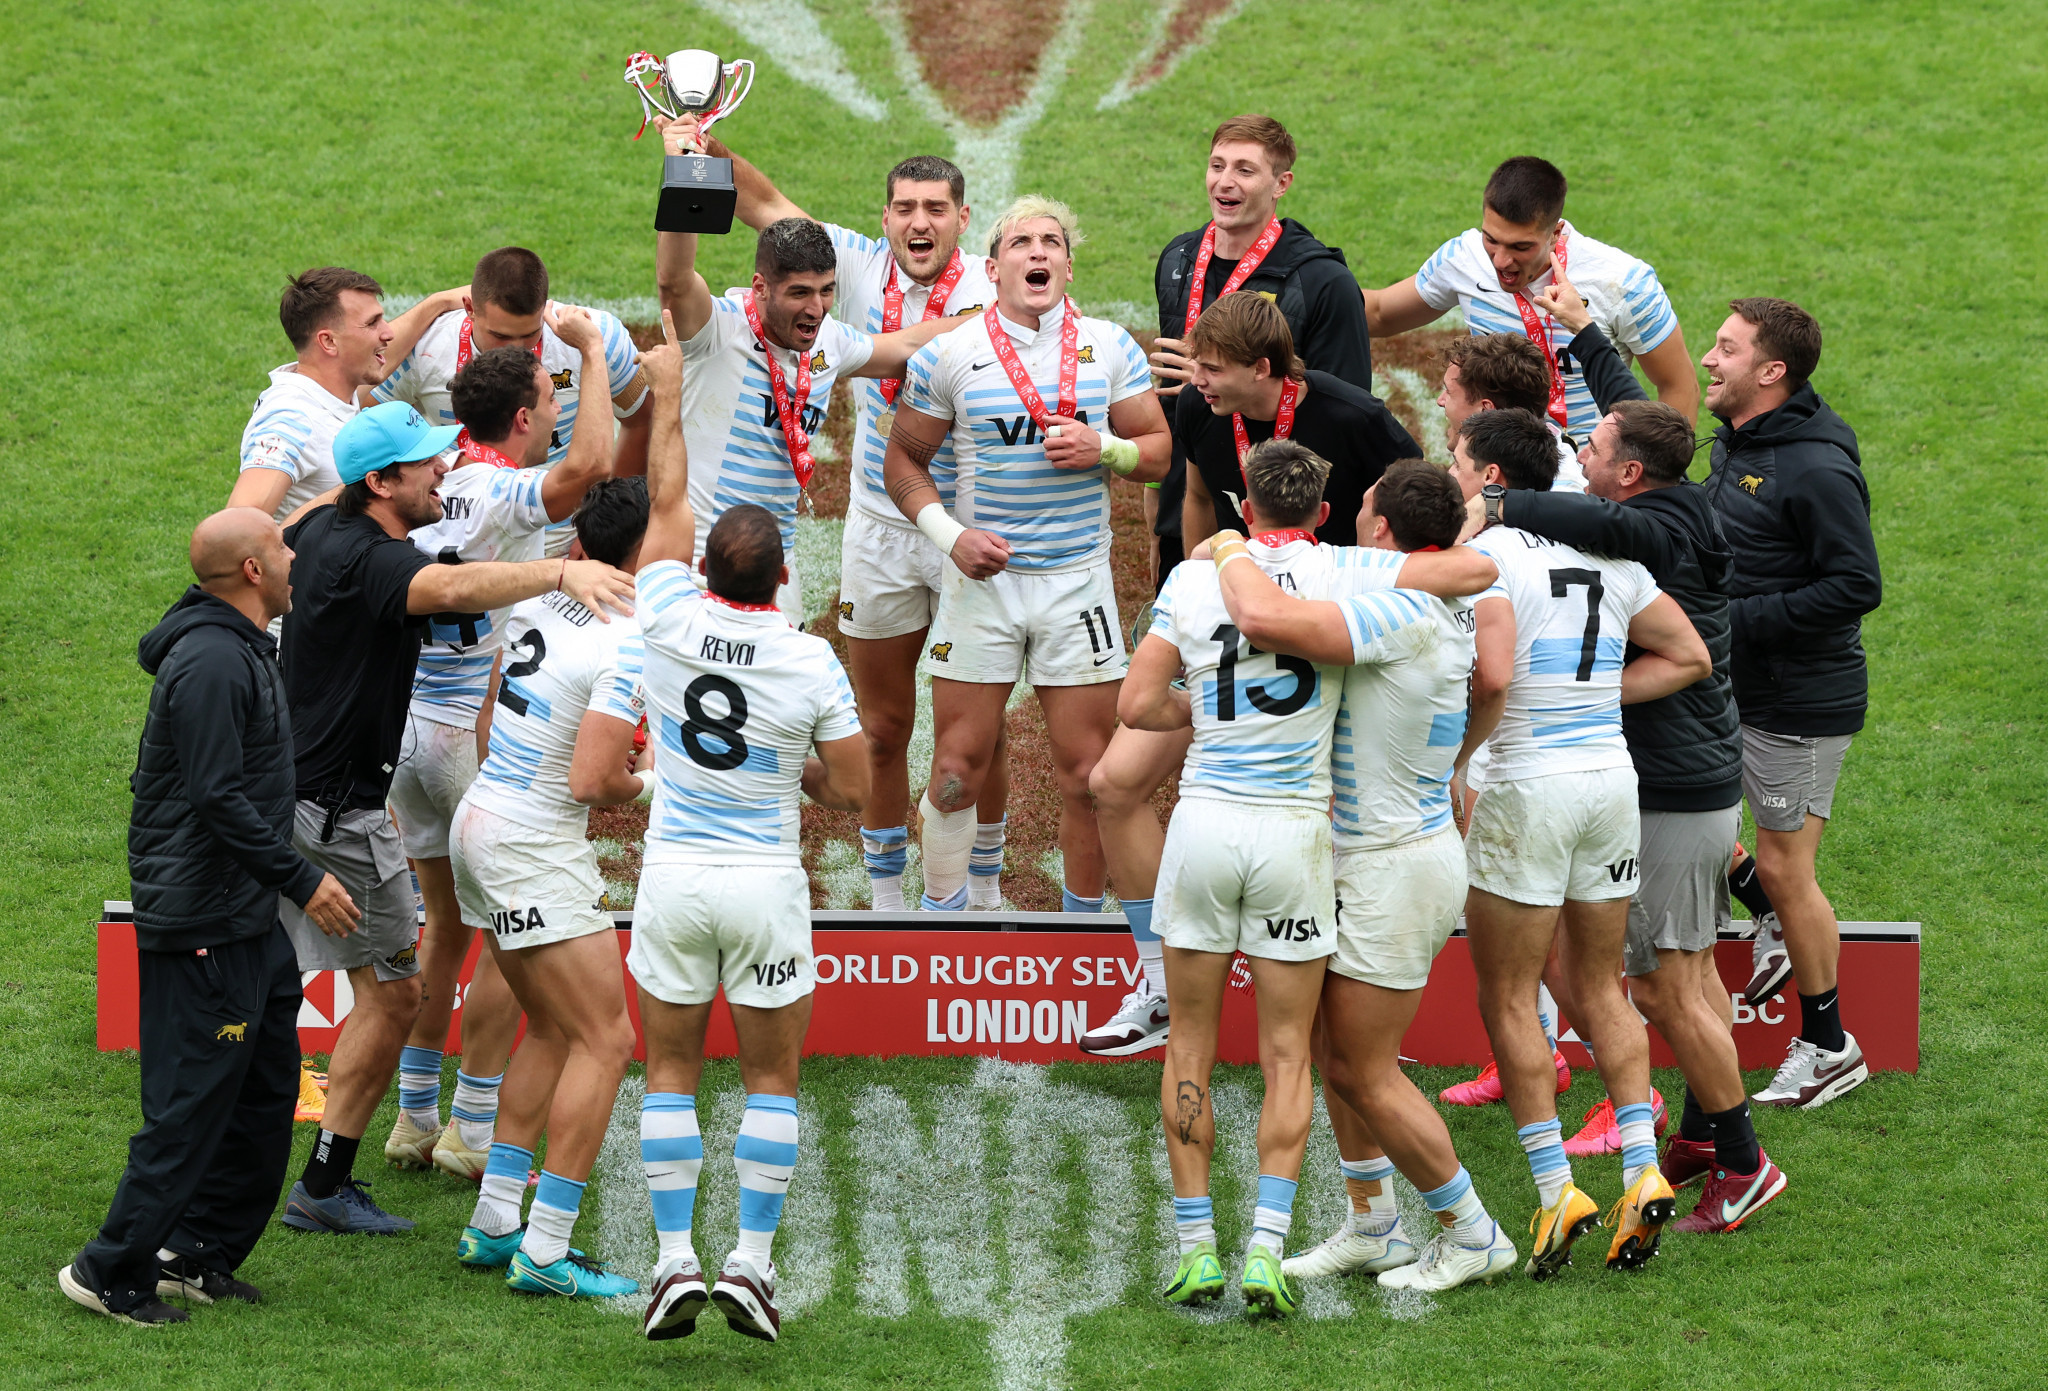 Argentina had already qualified for Paris 2024, and won the final World Rugby Sevens Series tournament of the season in London ©Getty Images